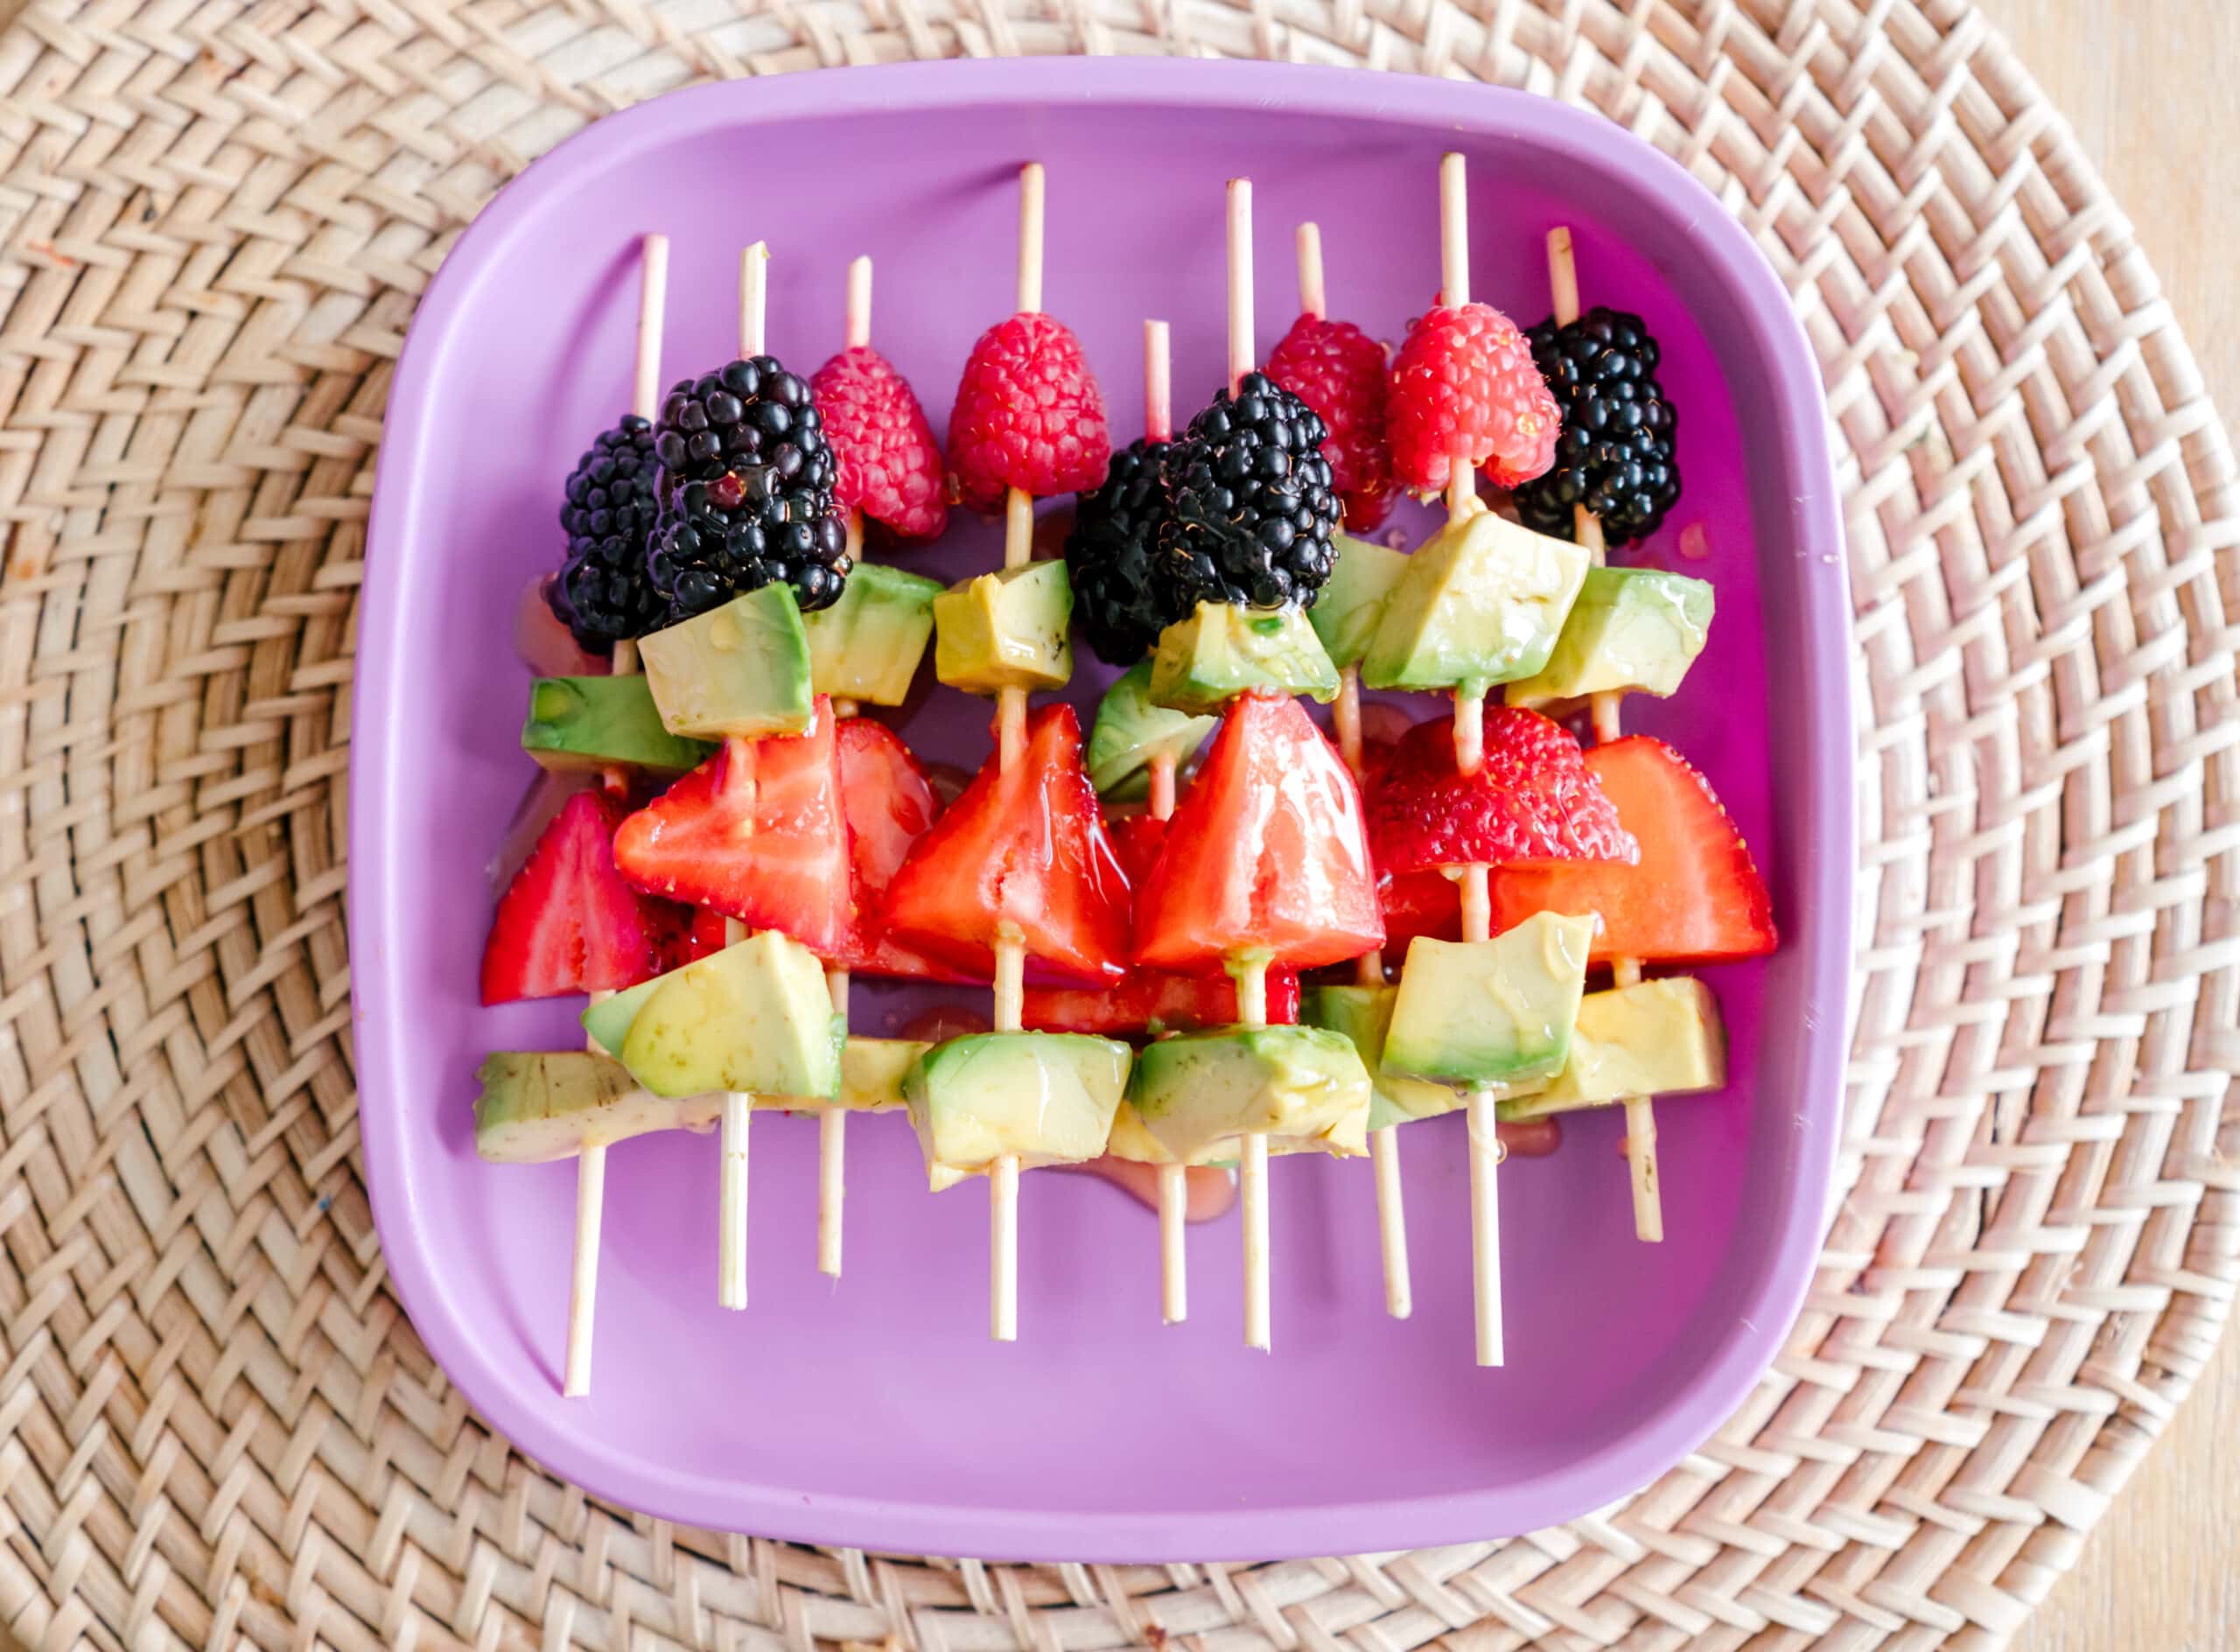 Avocado and berry snack on skewers on kids plate